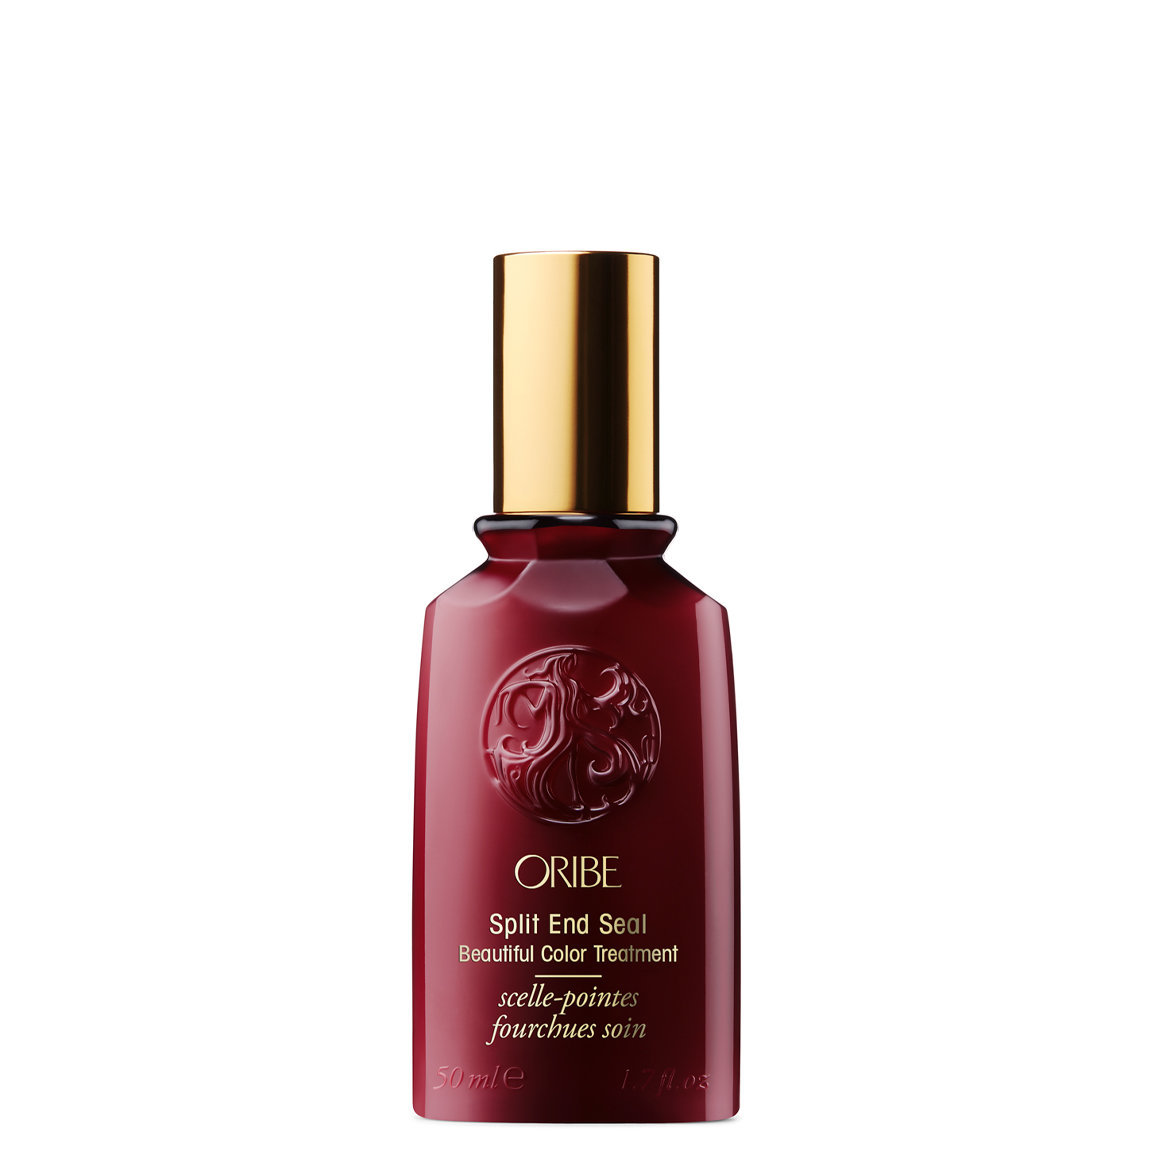 Oribe Split End Seal alternative view 1 - product swatch.